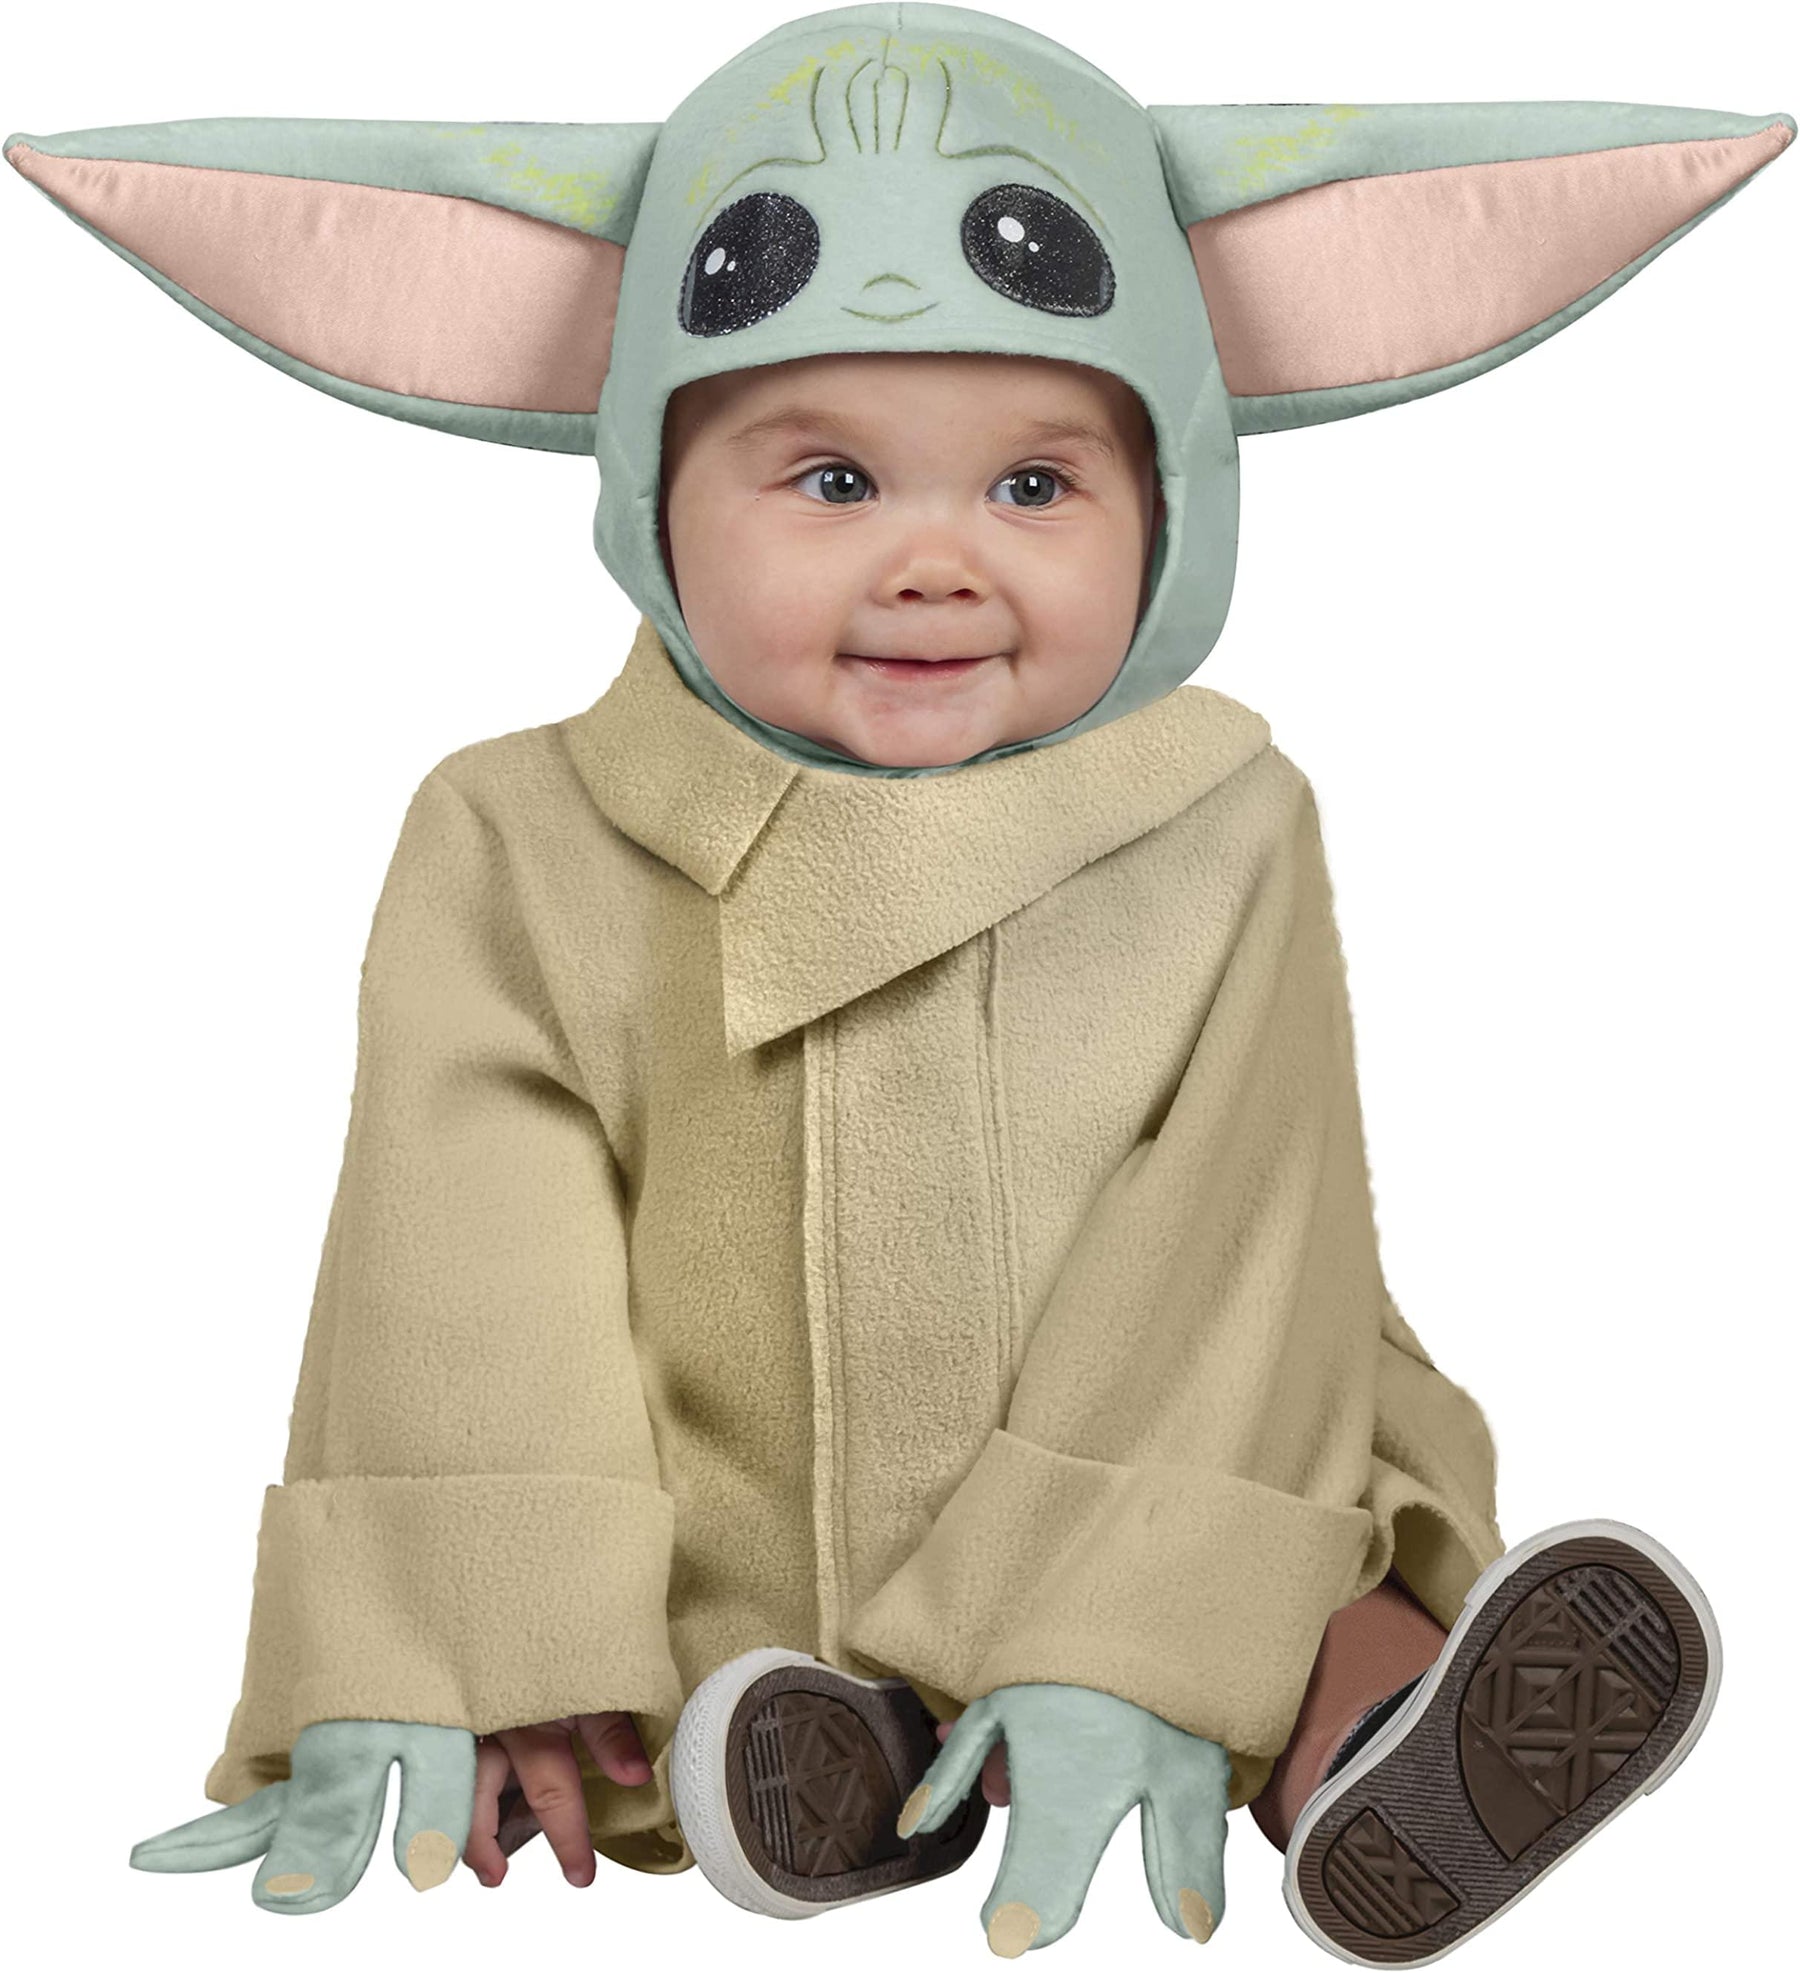 Star Wars The Mandalorian The Child Toddler Costume